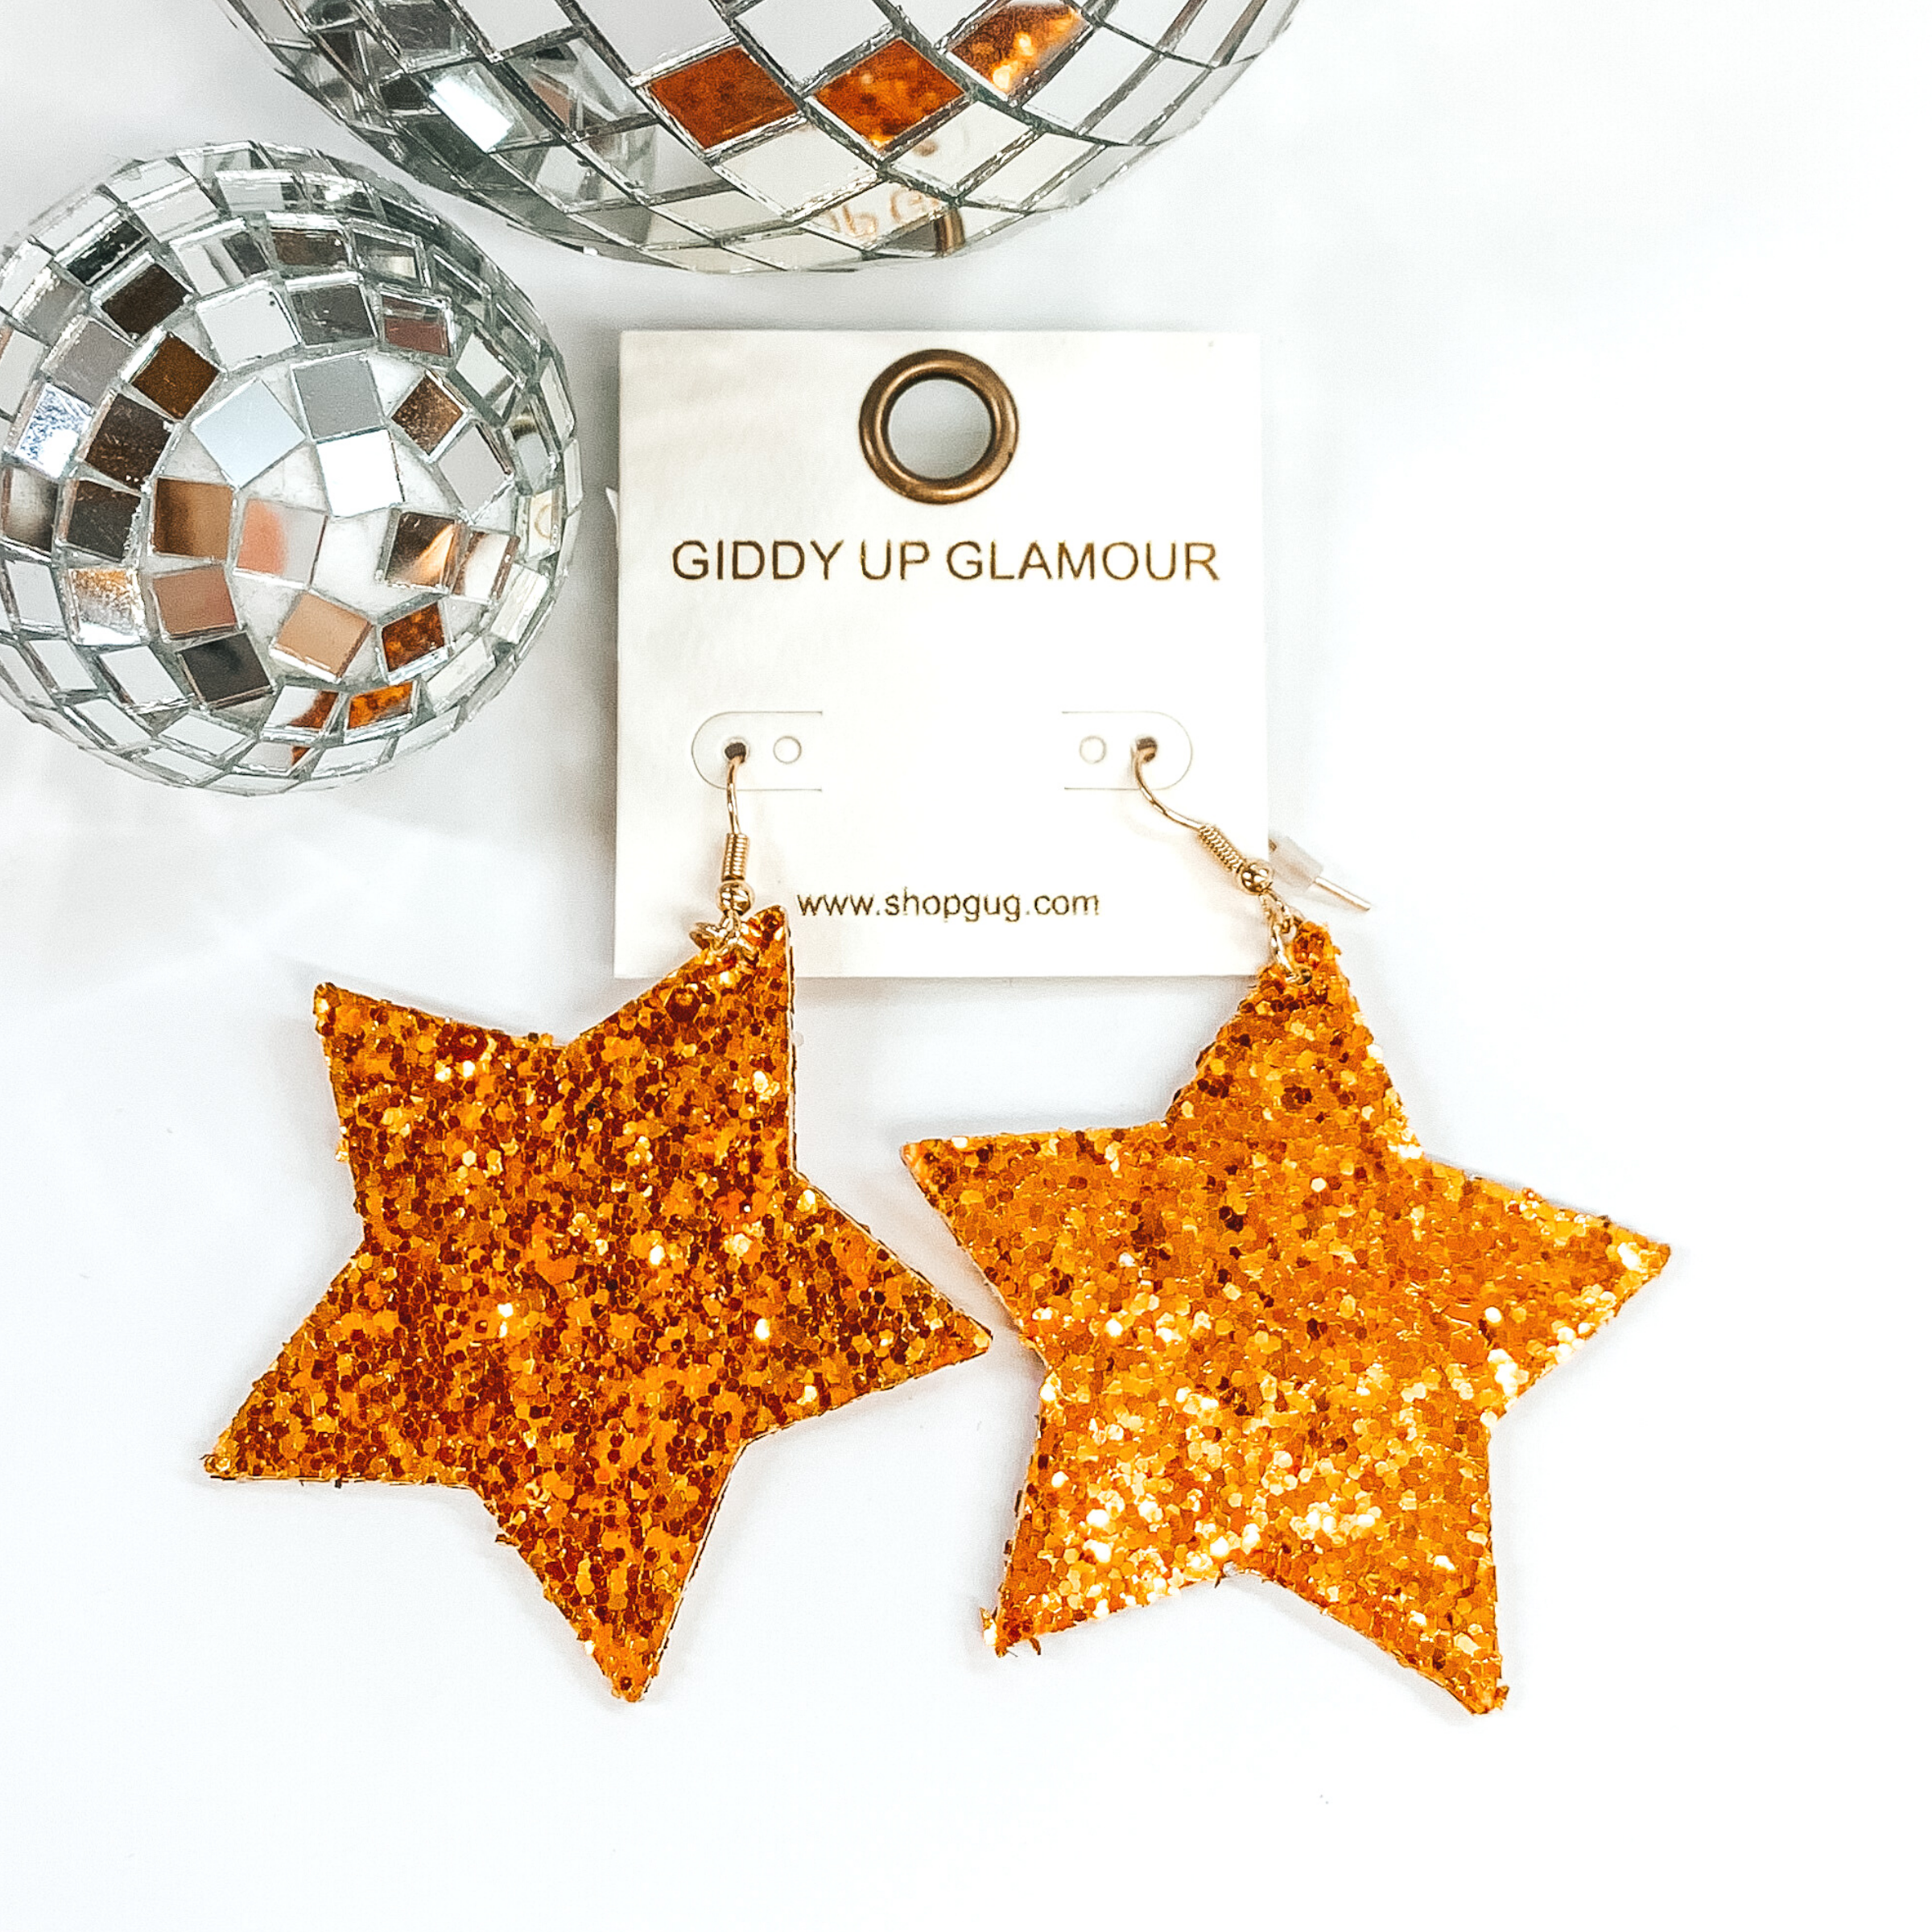 Glitter star dangle earrings in orange with a gold earrings hook. These earrings are pictured on a white background with a disco ball at the top of the picture.